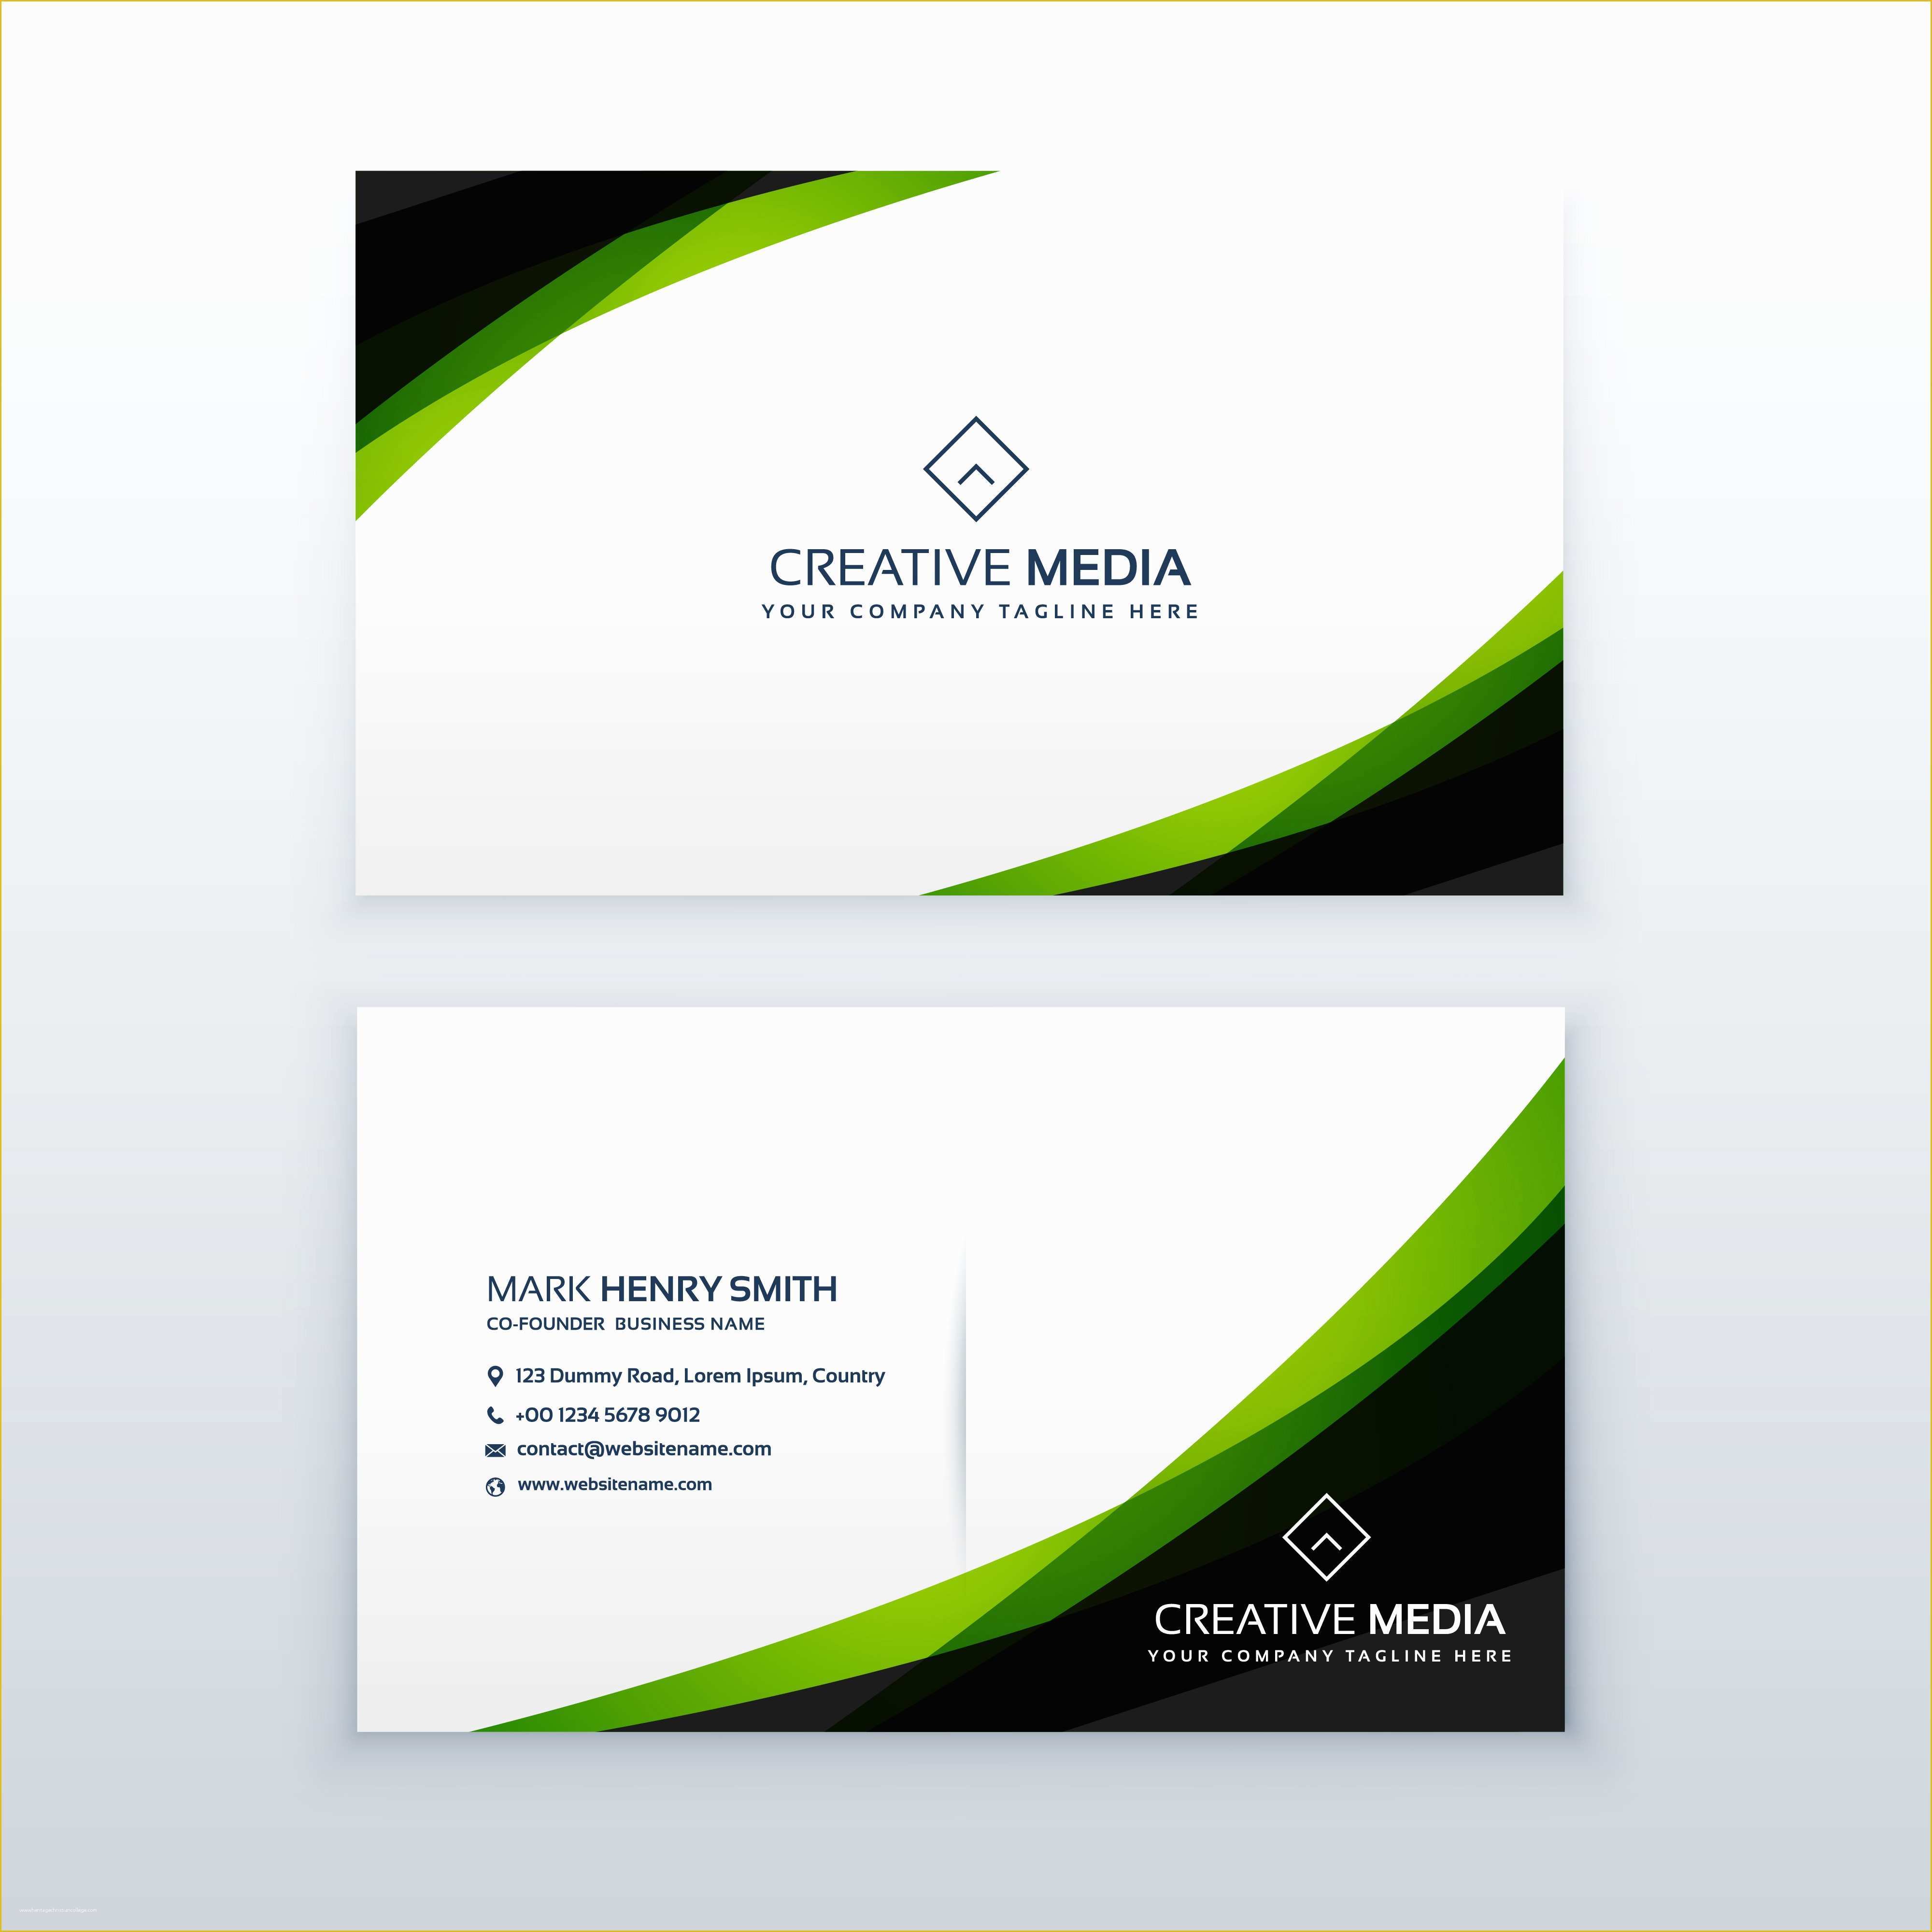 Online Business Card Template Free Download Of Clean Simple Green Business Card Design Template